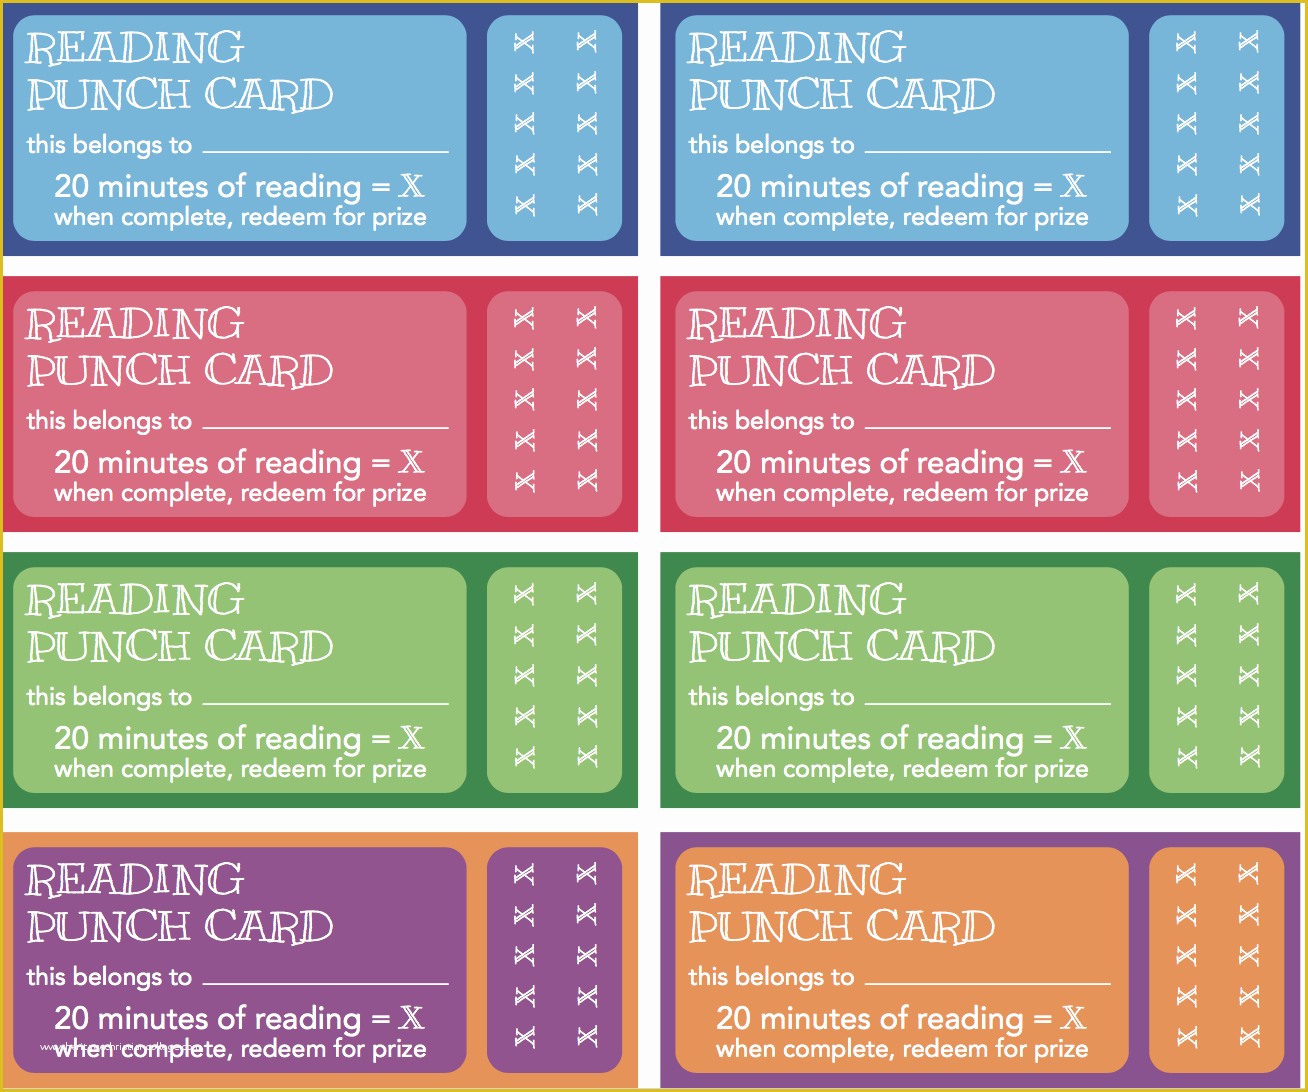 Free Punch Card Template or Design Of Reading Punch Card Printable – Satsuma Designs